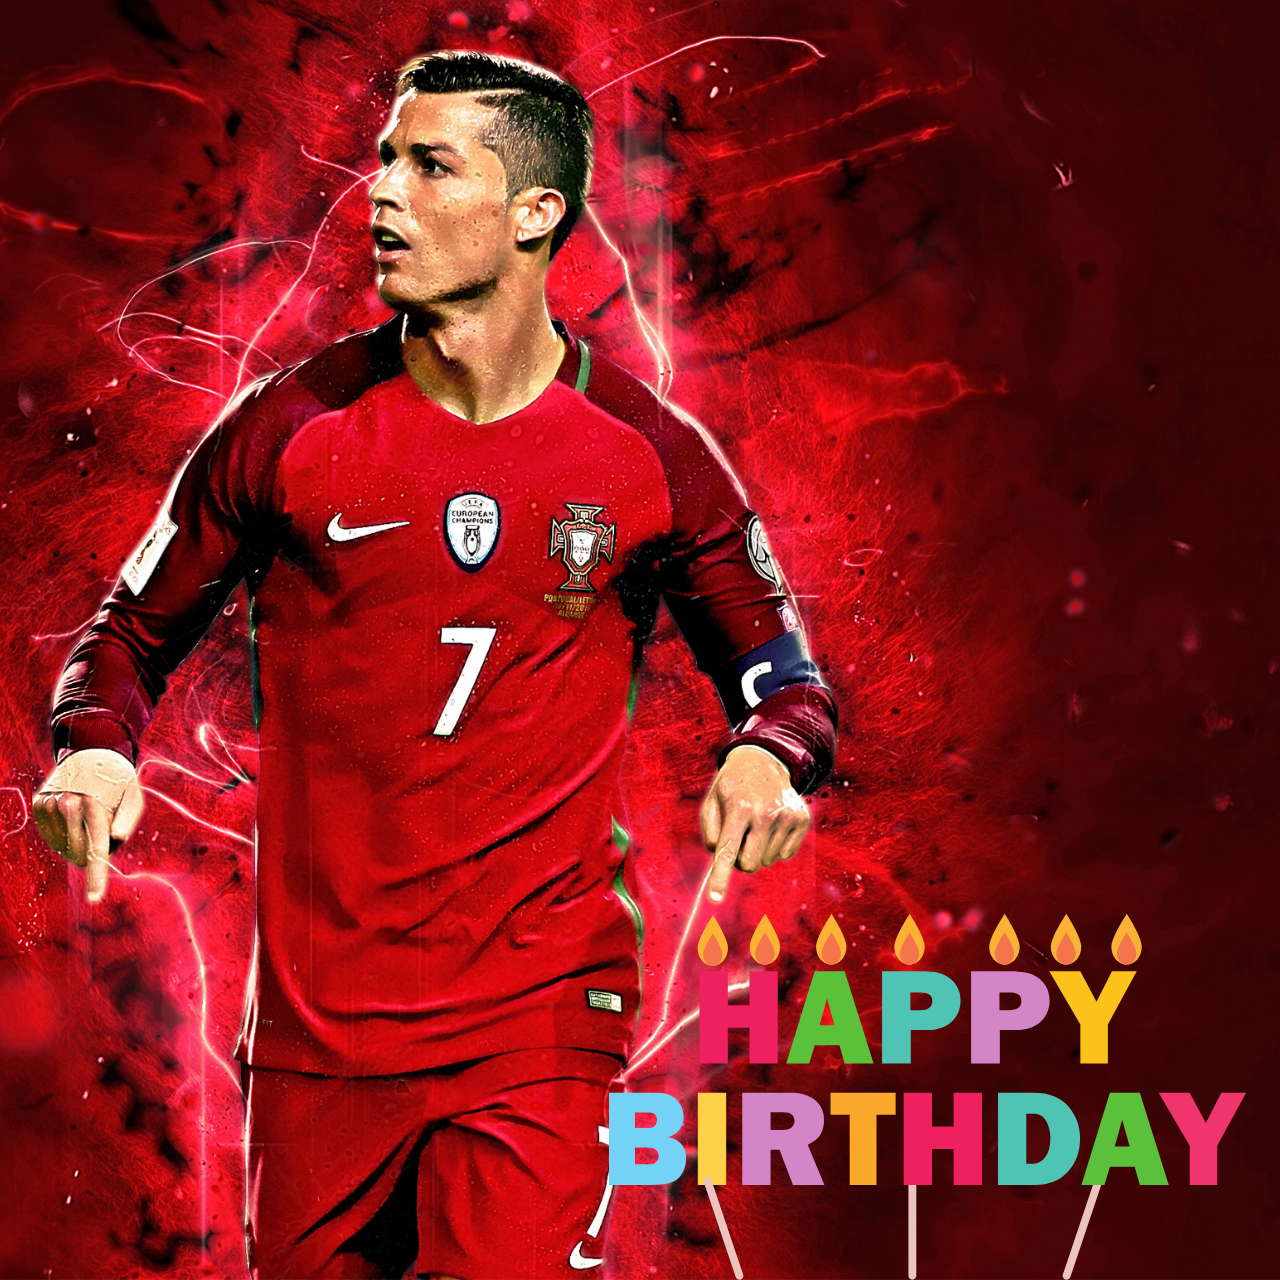 Happy Birthday Cristiano Ronaldo: Wishes, Quotes, Photos, Messages, Greetings, and WhatsApp Status to greet CR7